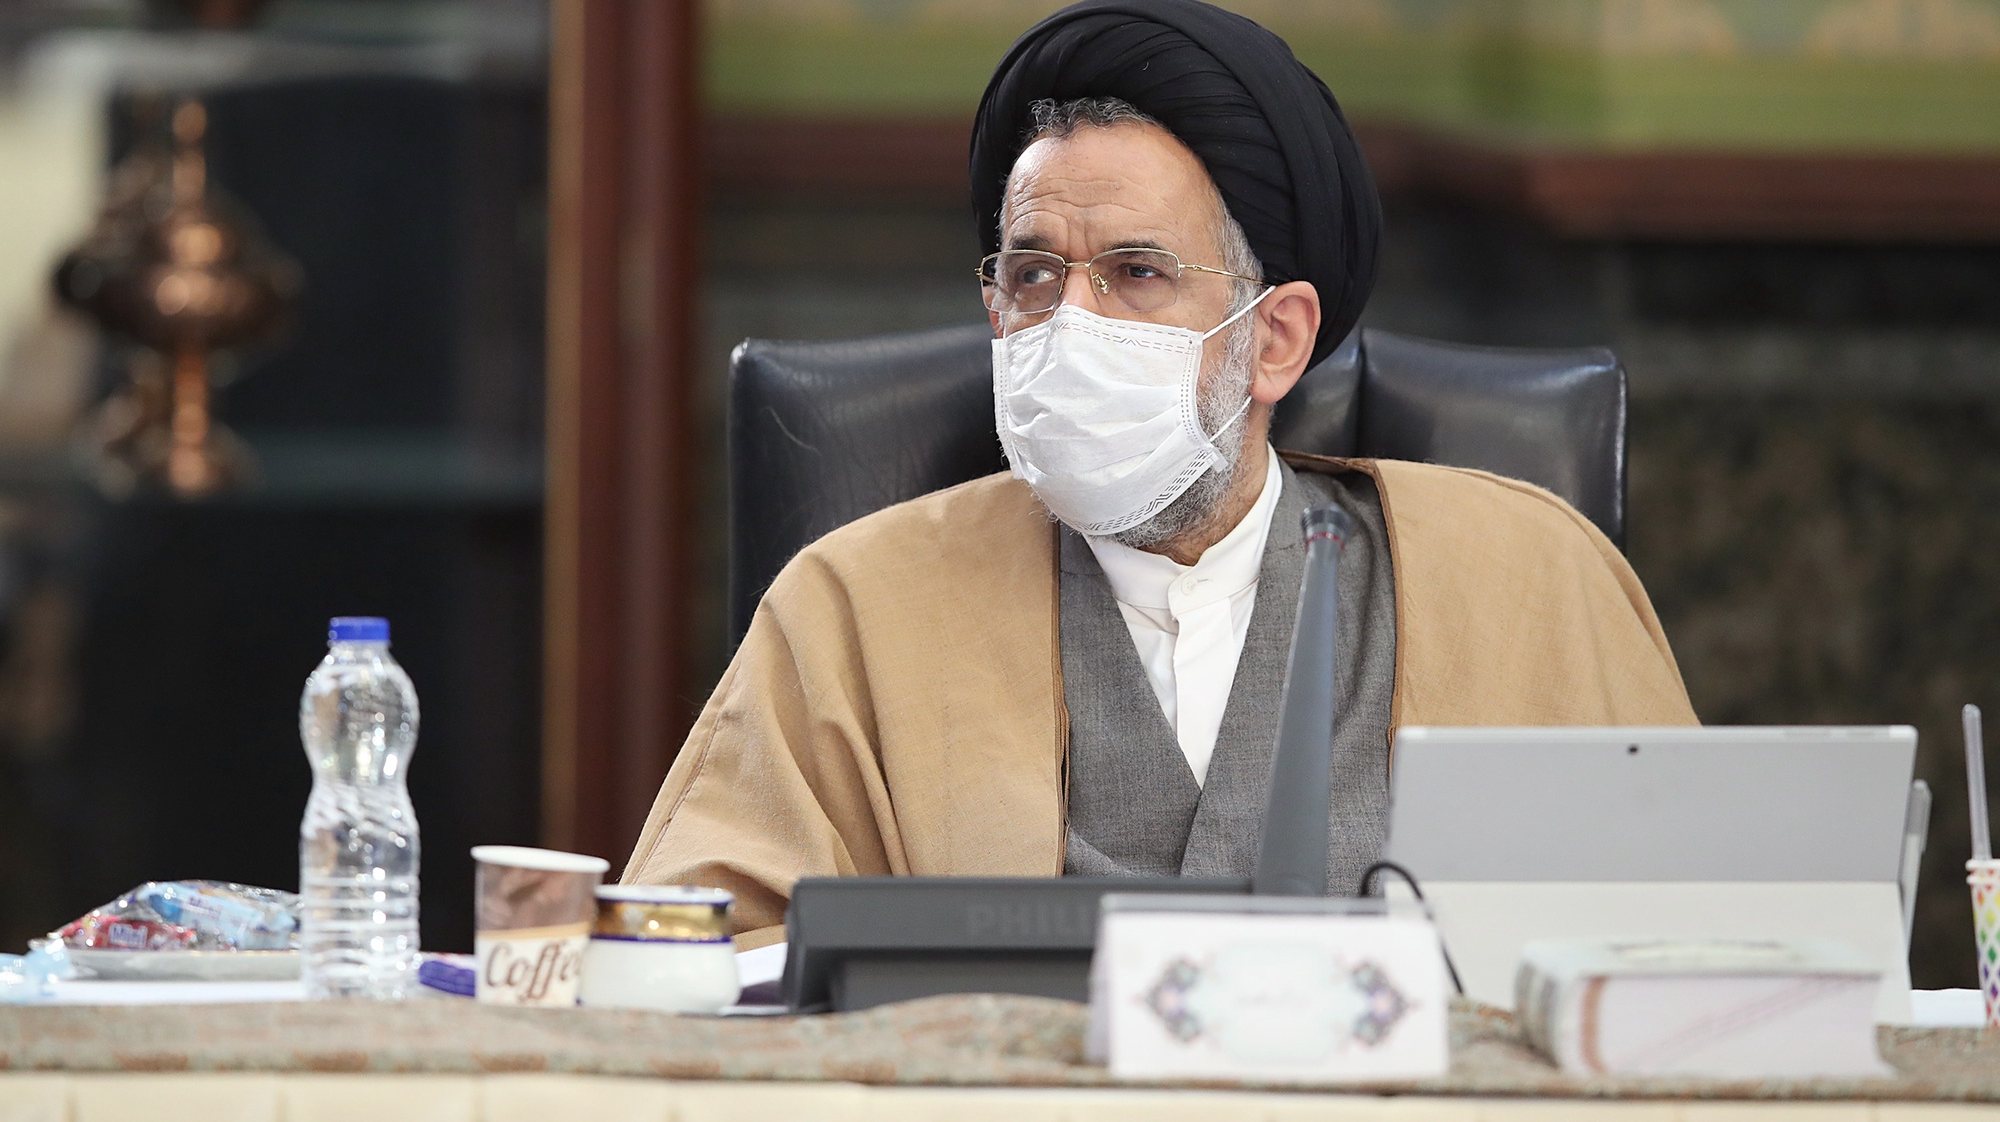 epa08364278 A handout photo made available by Iran&#039;s Presidential Office shows Iranian intelligence minister Mahmoud Alavi wearing a face mask during a cabinet meeting in Tehran, Iran, 15 April 2020. According to media reports, Rouhani announced that the country will not hold the Islamic Republic of Iran Army Day on 18 April 2020 due to the coronavirus pandemic in the country.  EPA/IRAN&#039;S PRESIDENTIAL OFFICE HANDOUT  HANDOUT EDITORIAL USE ONLY/NO SALES